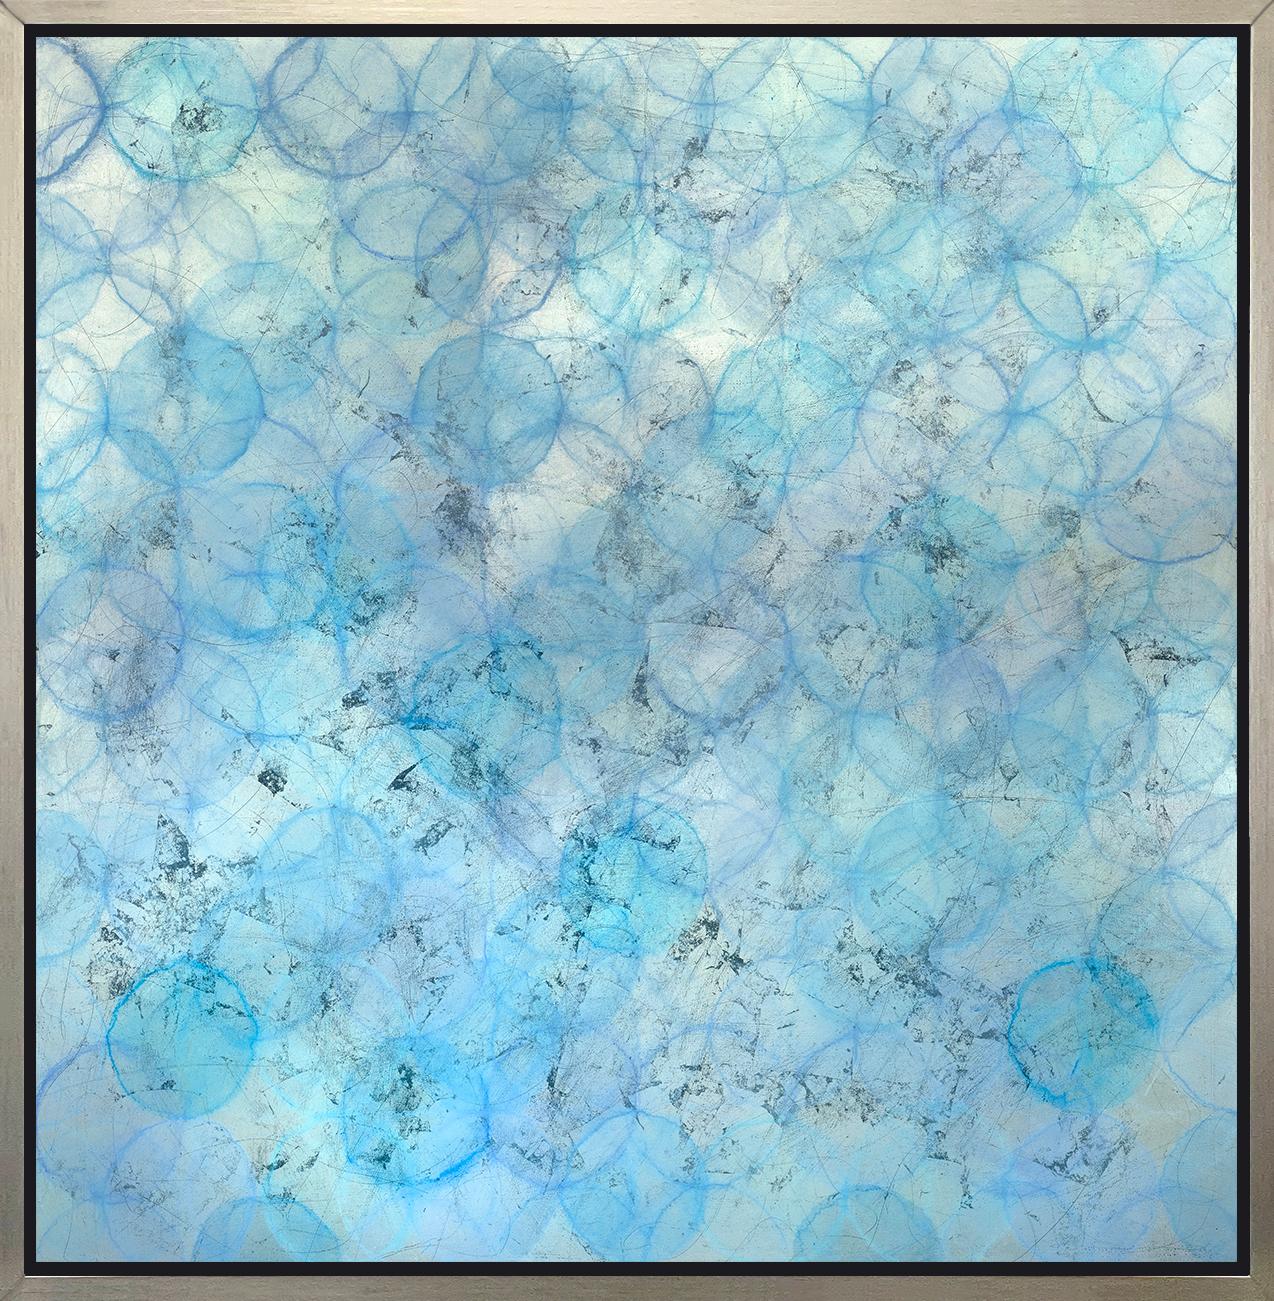 Roger Mudre Abstract Print - "Brunnera, " Framed Limited Edition Giclee Print, 30" x 30"